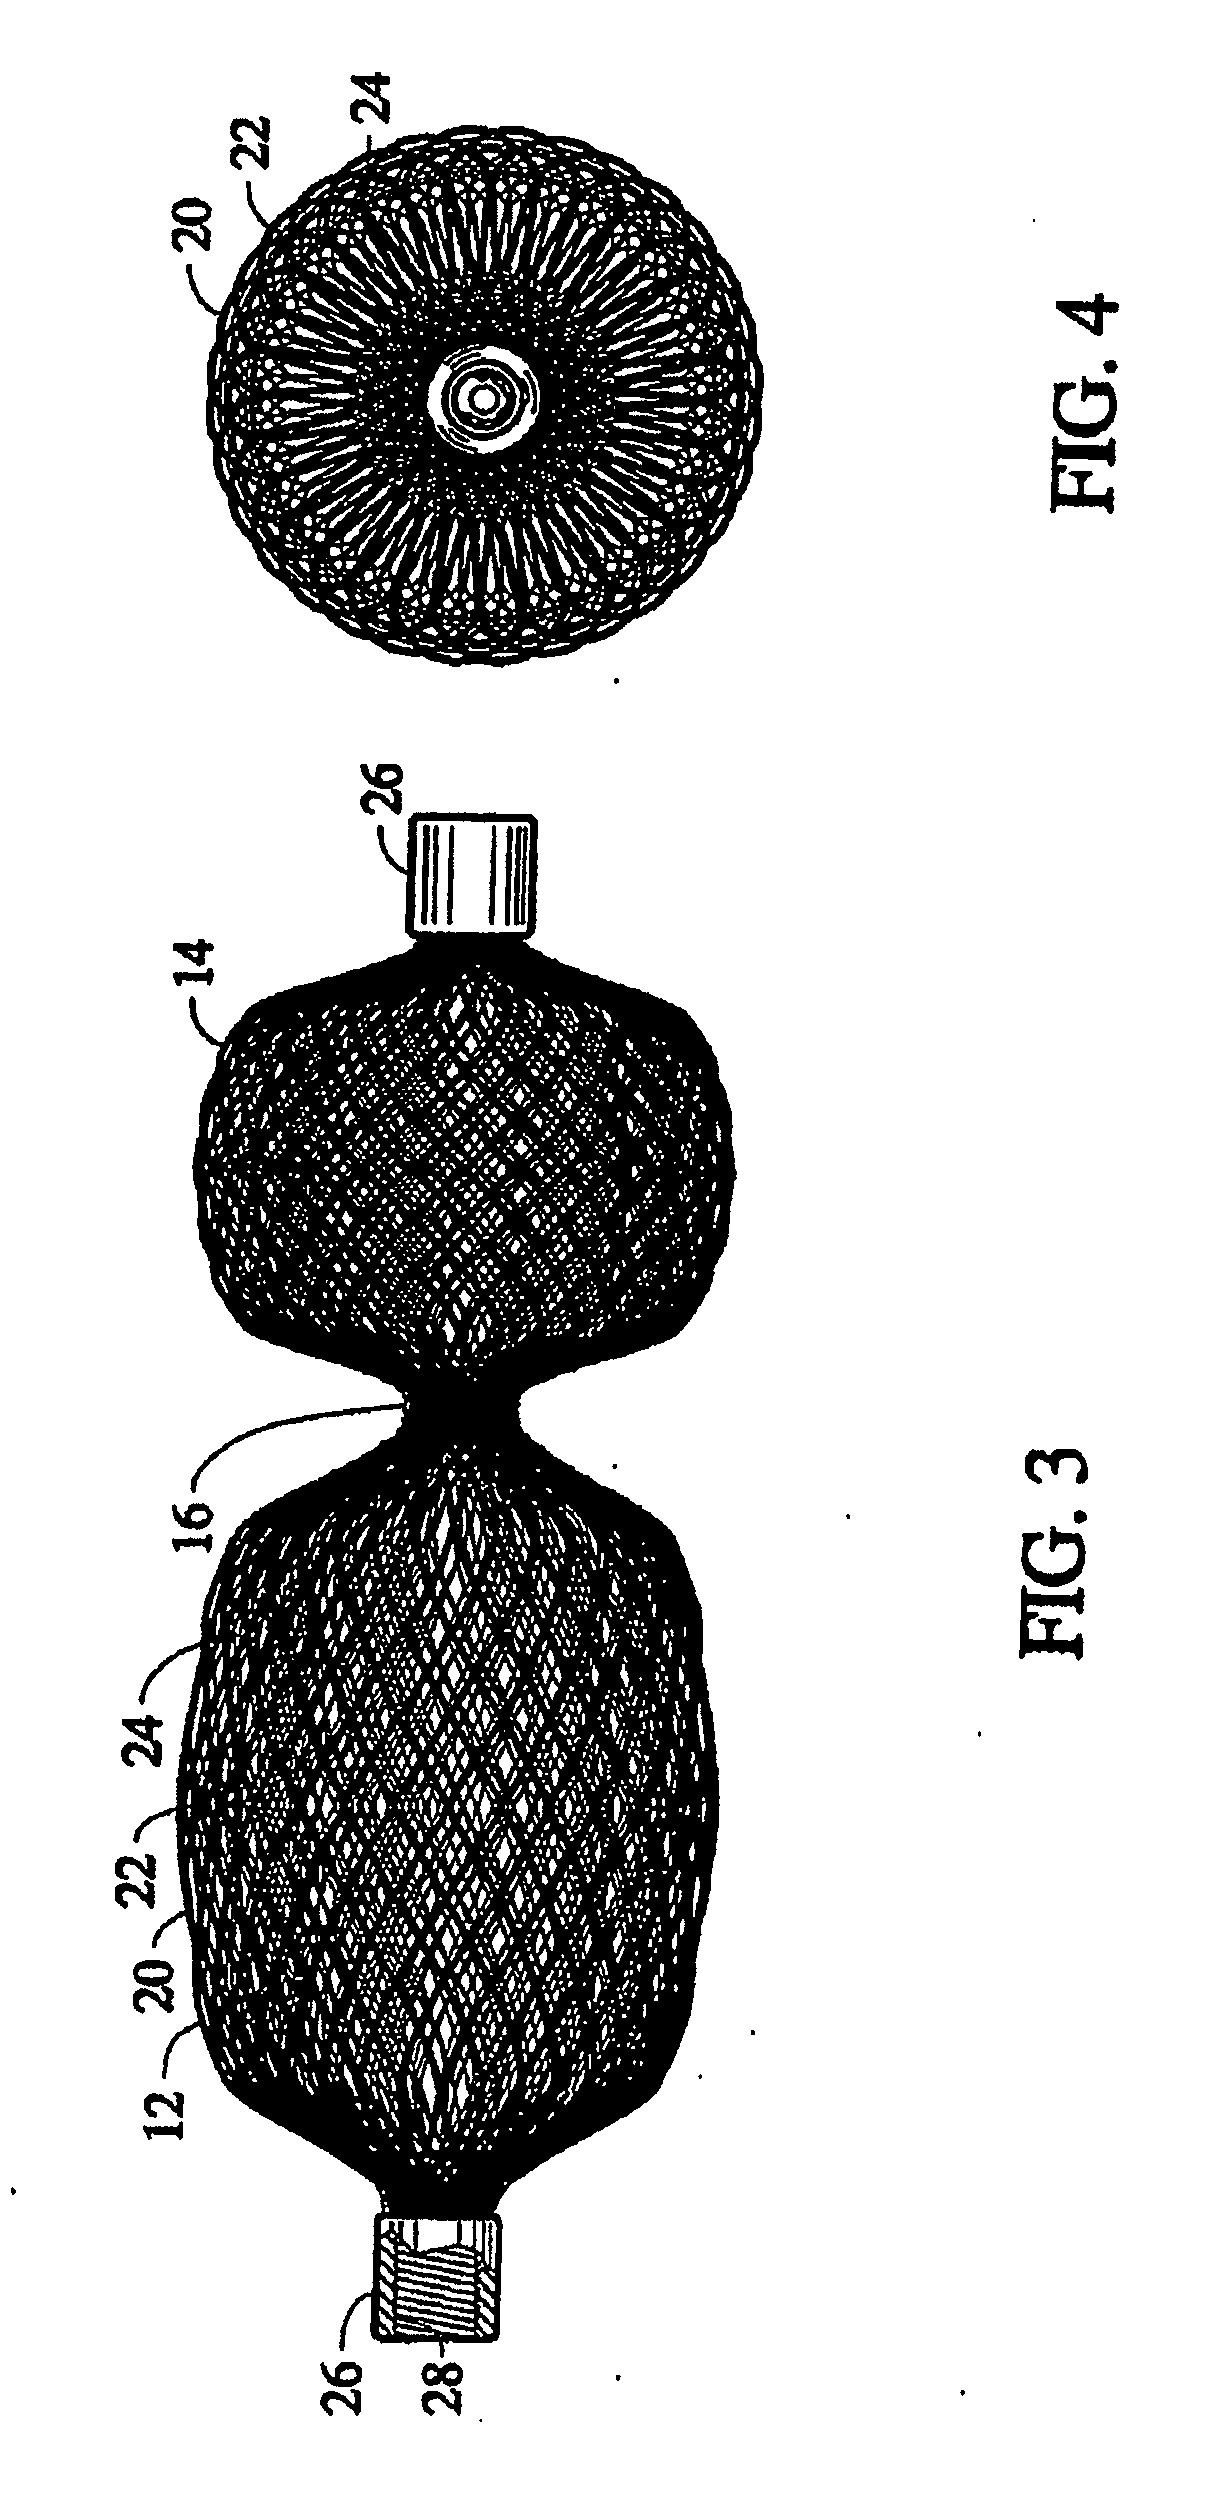 Device for occluding vascular defects